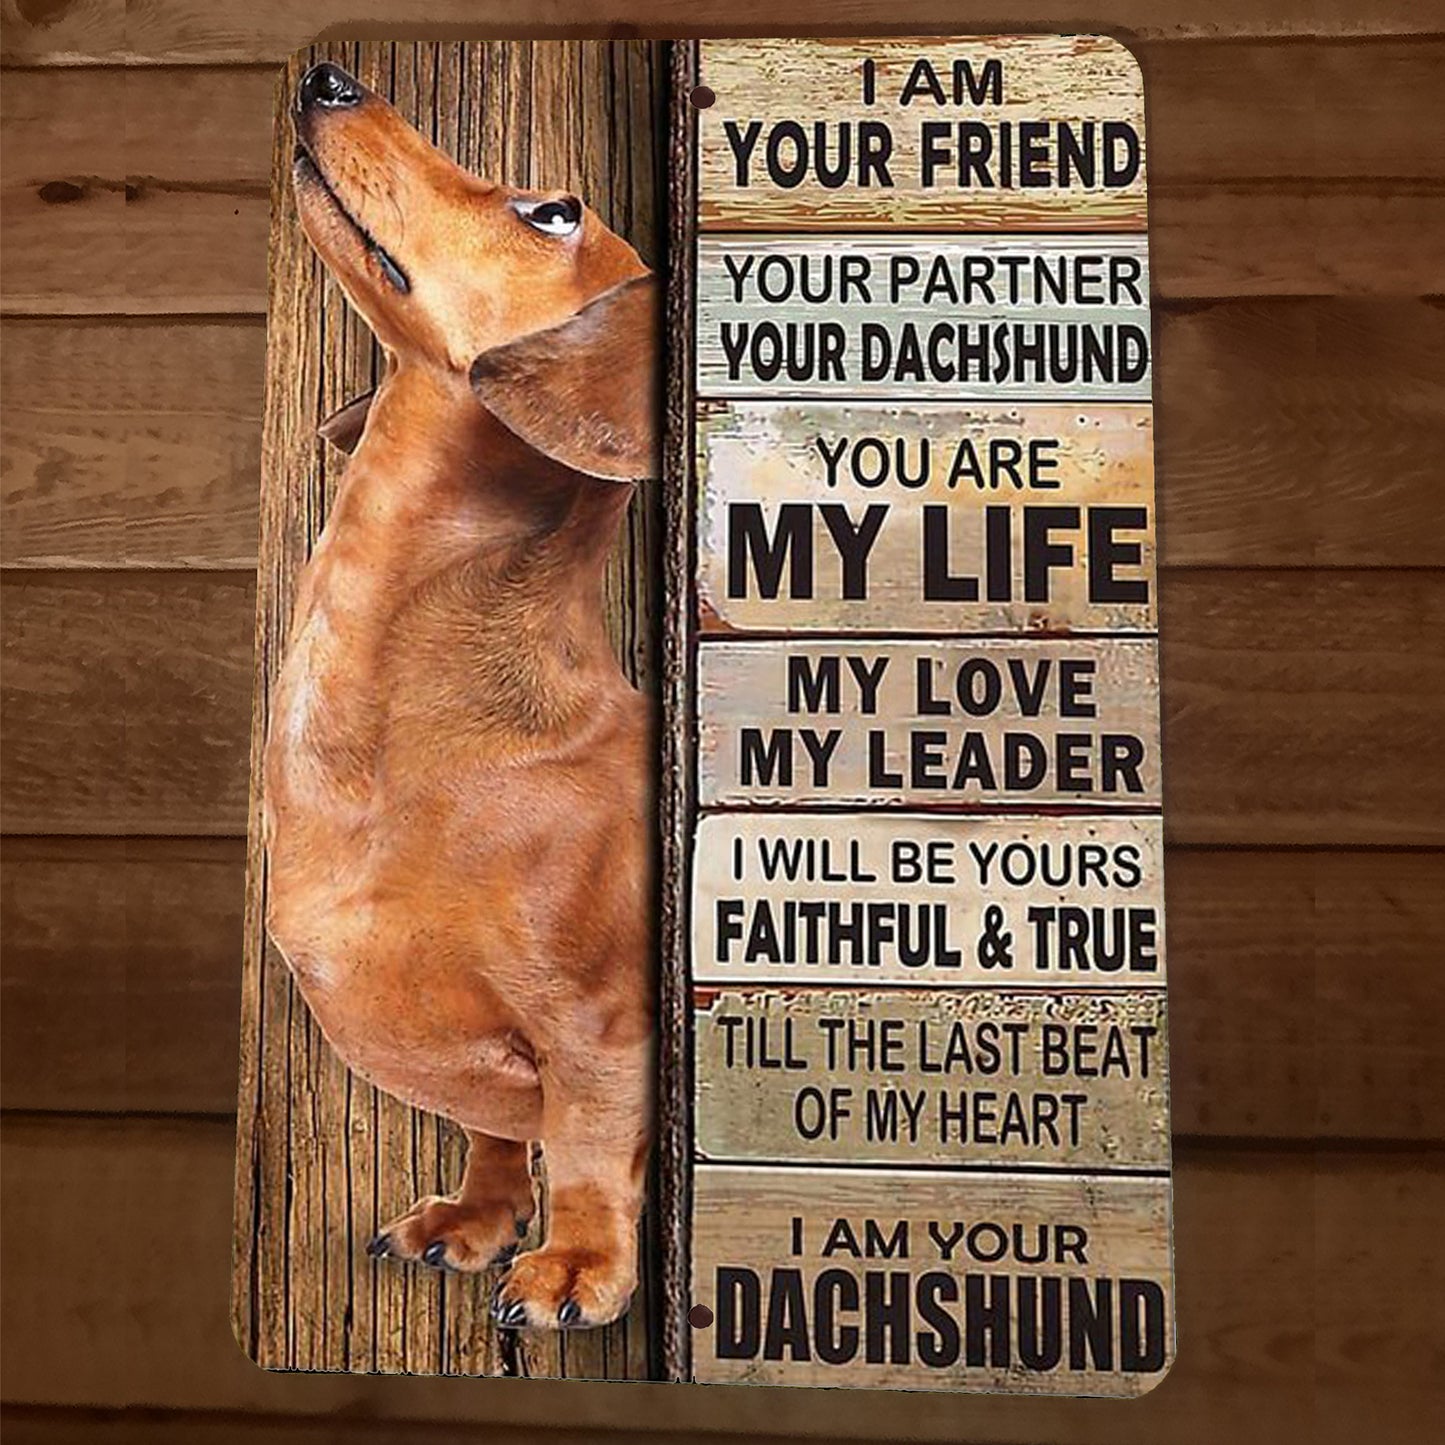 Bundle of Barks 5 Dachshund Weiner Dog 8x12 Metal Animal Walls Signs and Mouse pad